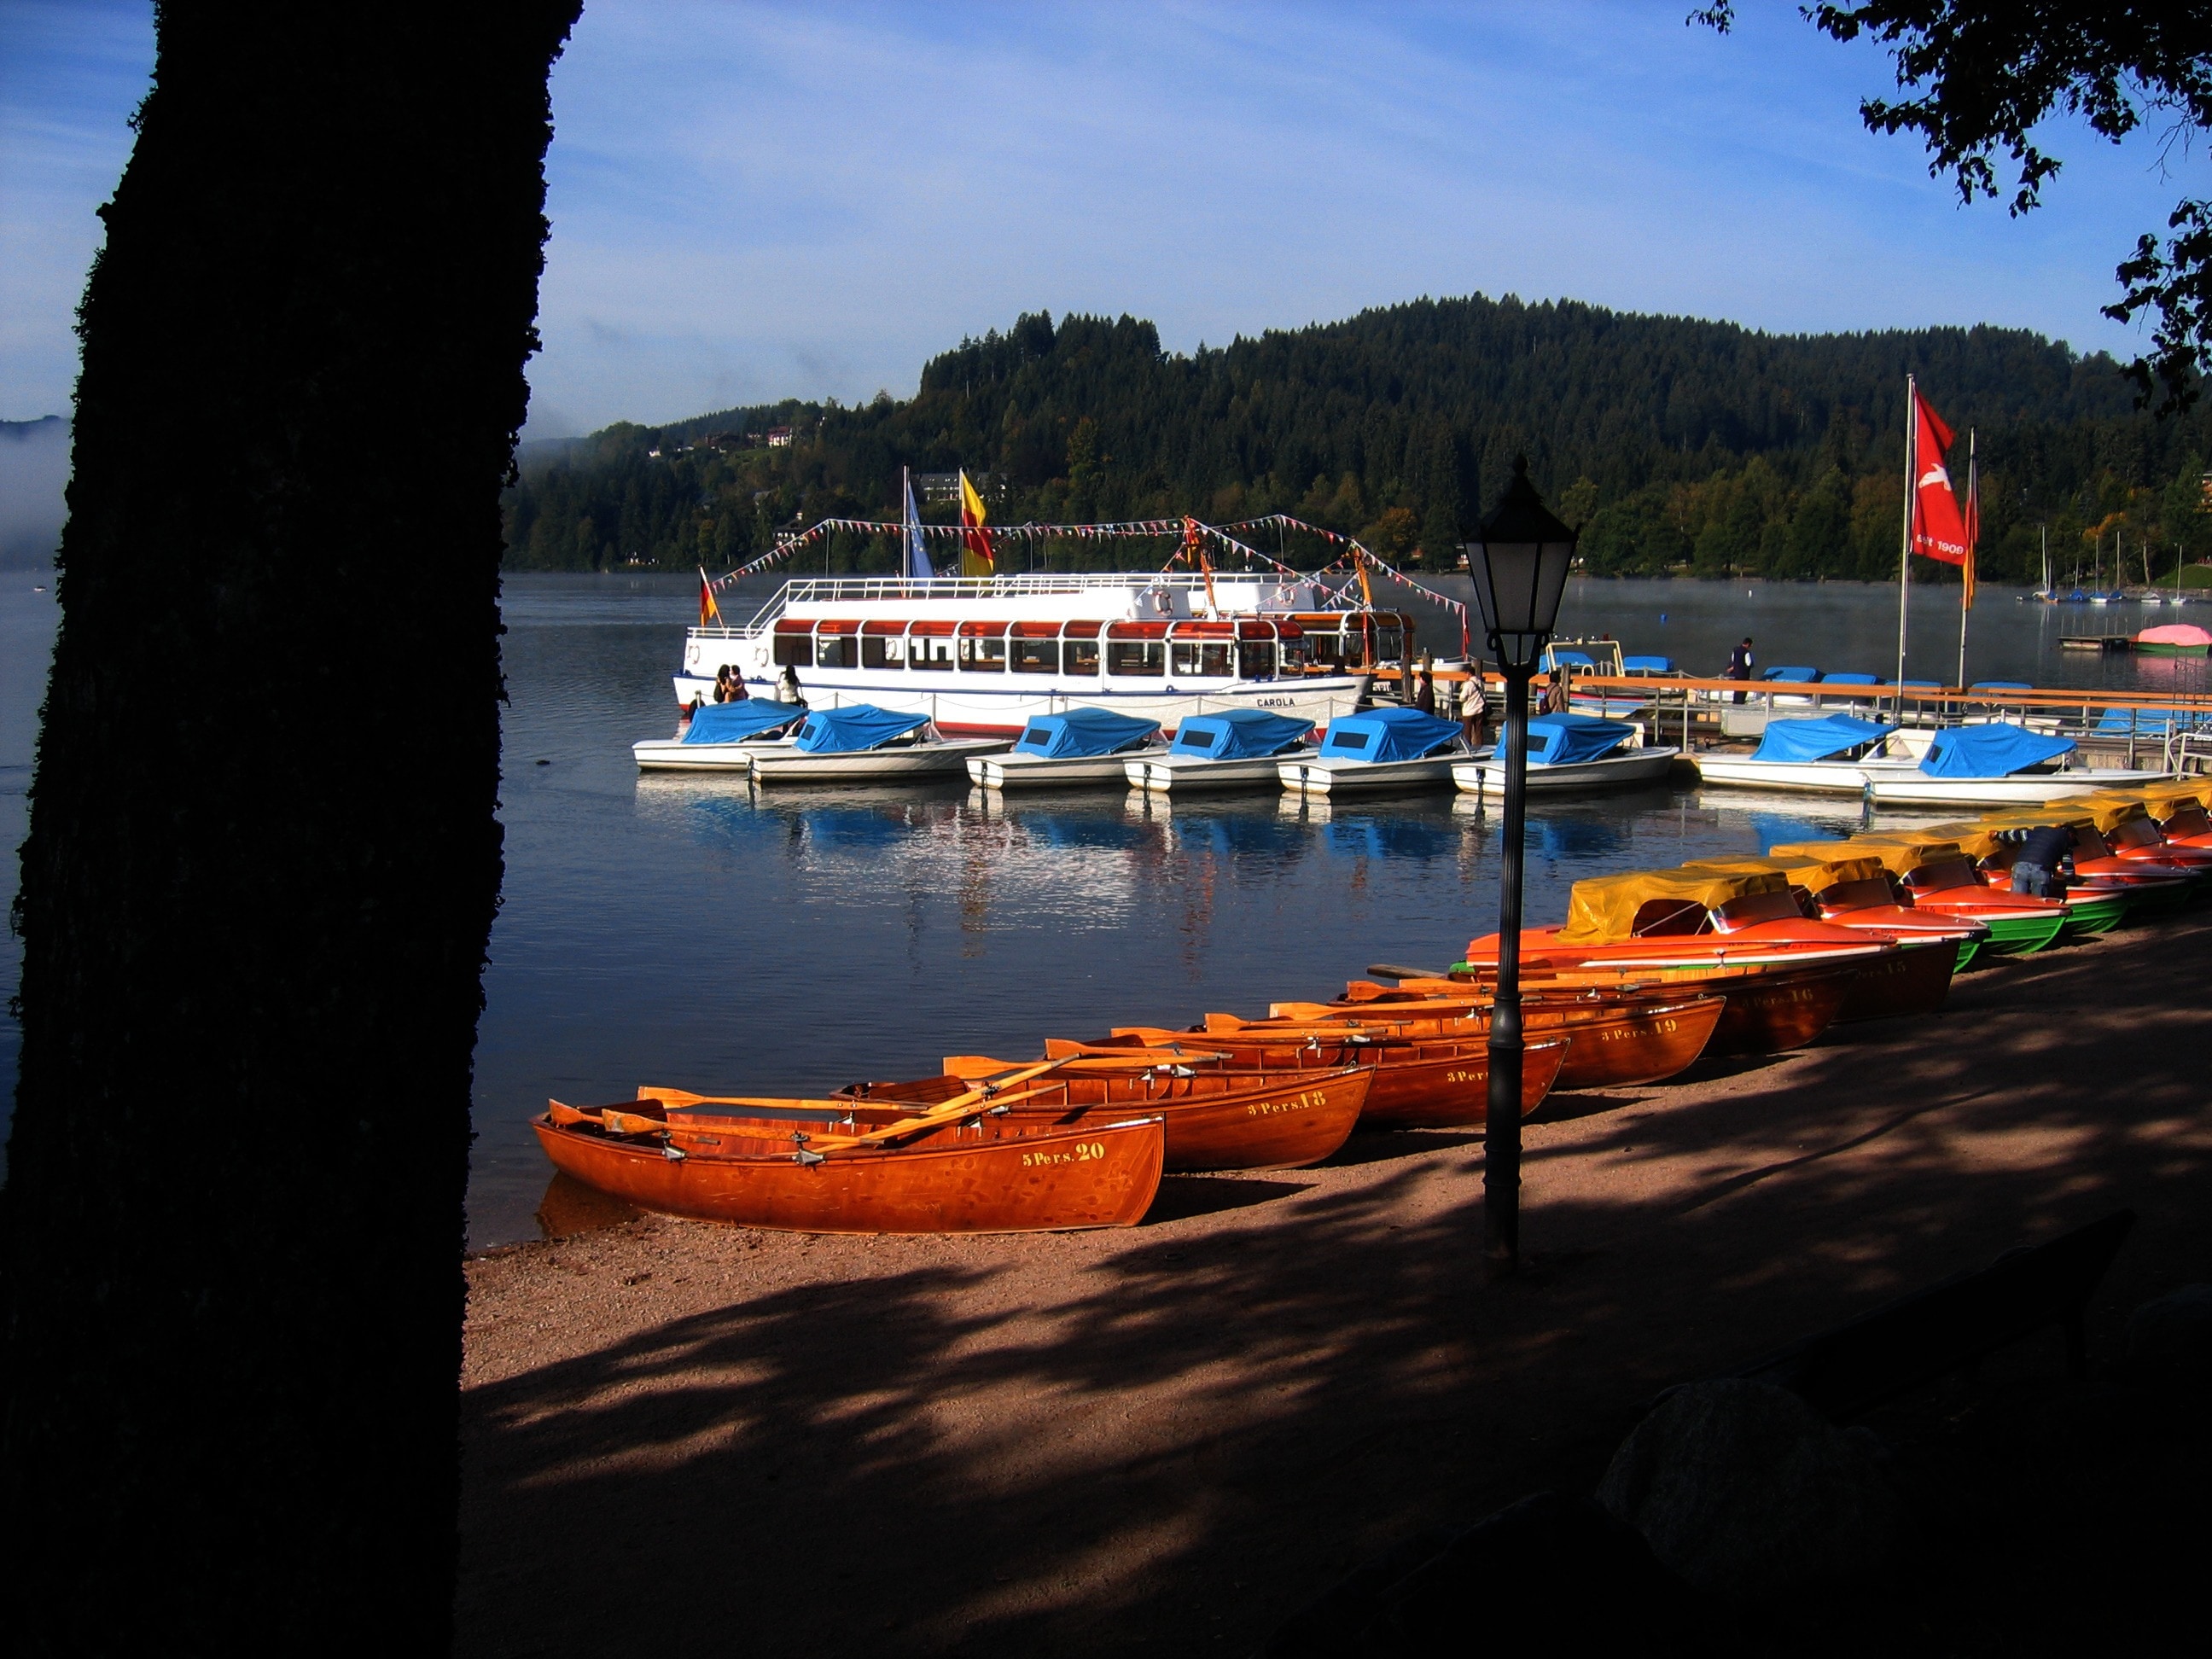 boats on seashore during daytime